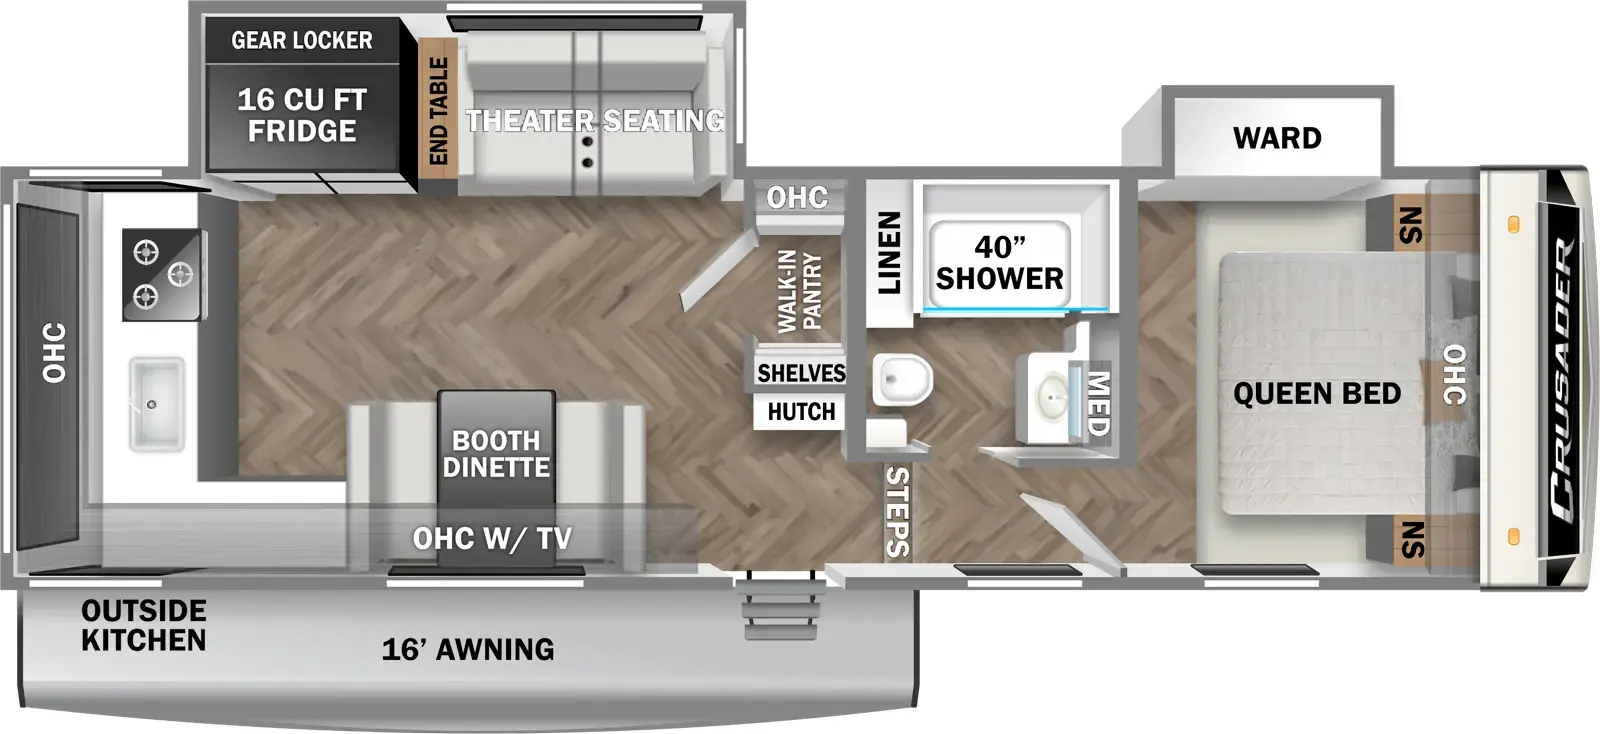 The 265MLE has two slideouts and one entry. Exterior features an outside kitchen and awning. Interior layout front to back: foot facing queen bed with overhead cabinet and night stands on each side, and an off-door side wardrobe slideout; off-door side full bathroom with medicine cabinet and linen closet; steps down to main living area and entry; hutch and walk-in pantry with overhead cabinet and shelves along inner wall; off-door side slideout with theater seating, end table, and refrigerator with gear locker behind; door side booth dinette with overhead cabinet and TV; kitchen counter wraps from door side to rear with sink, cooktop and overhead cabinet. Optional free-standing dinette with four chairs available in place of booth dinette.